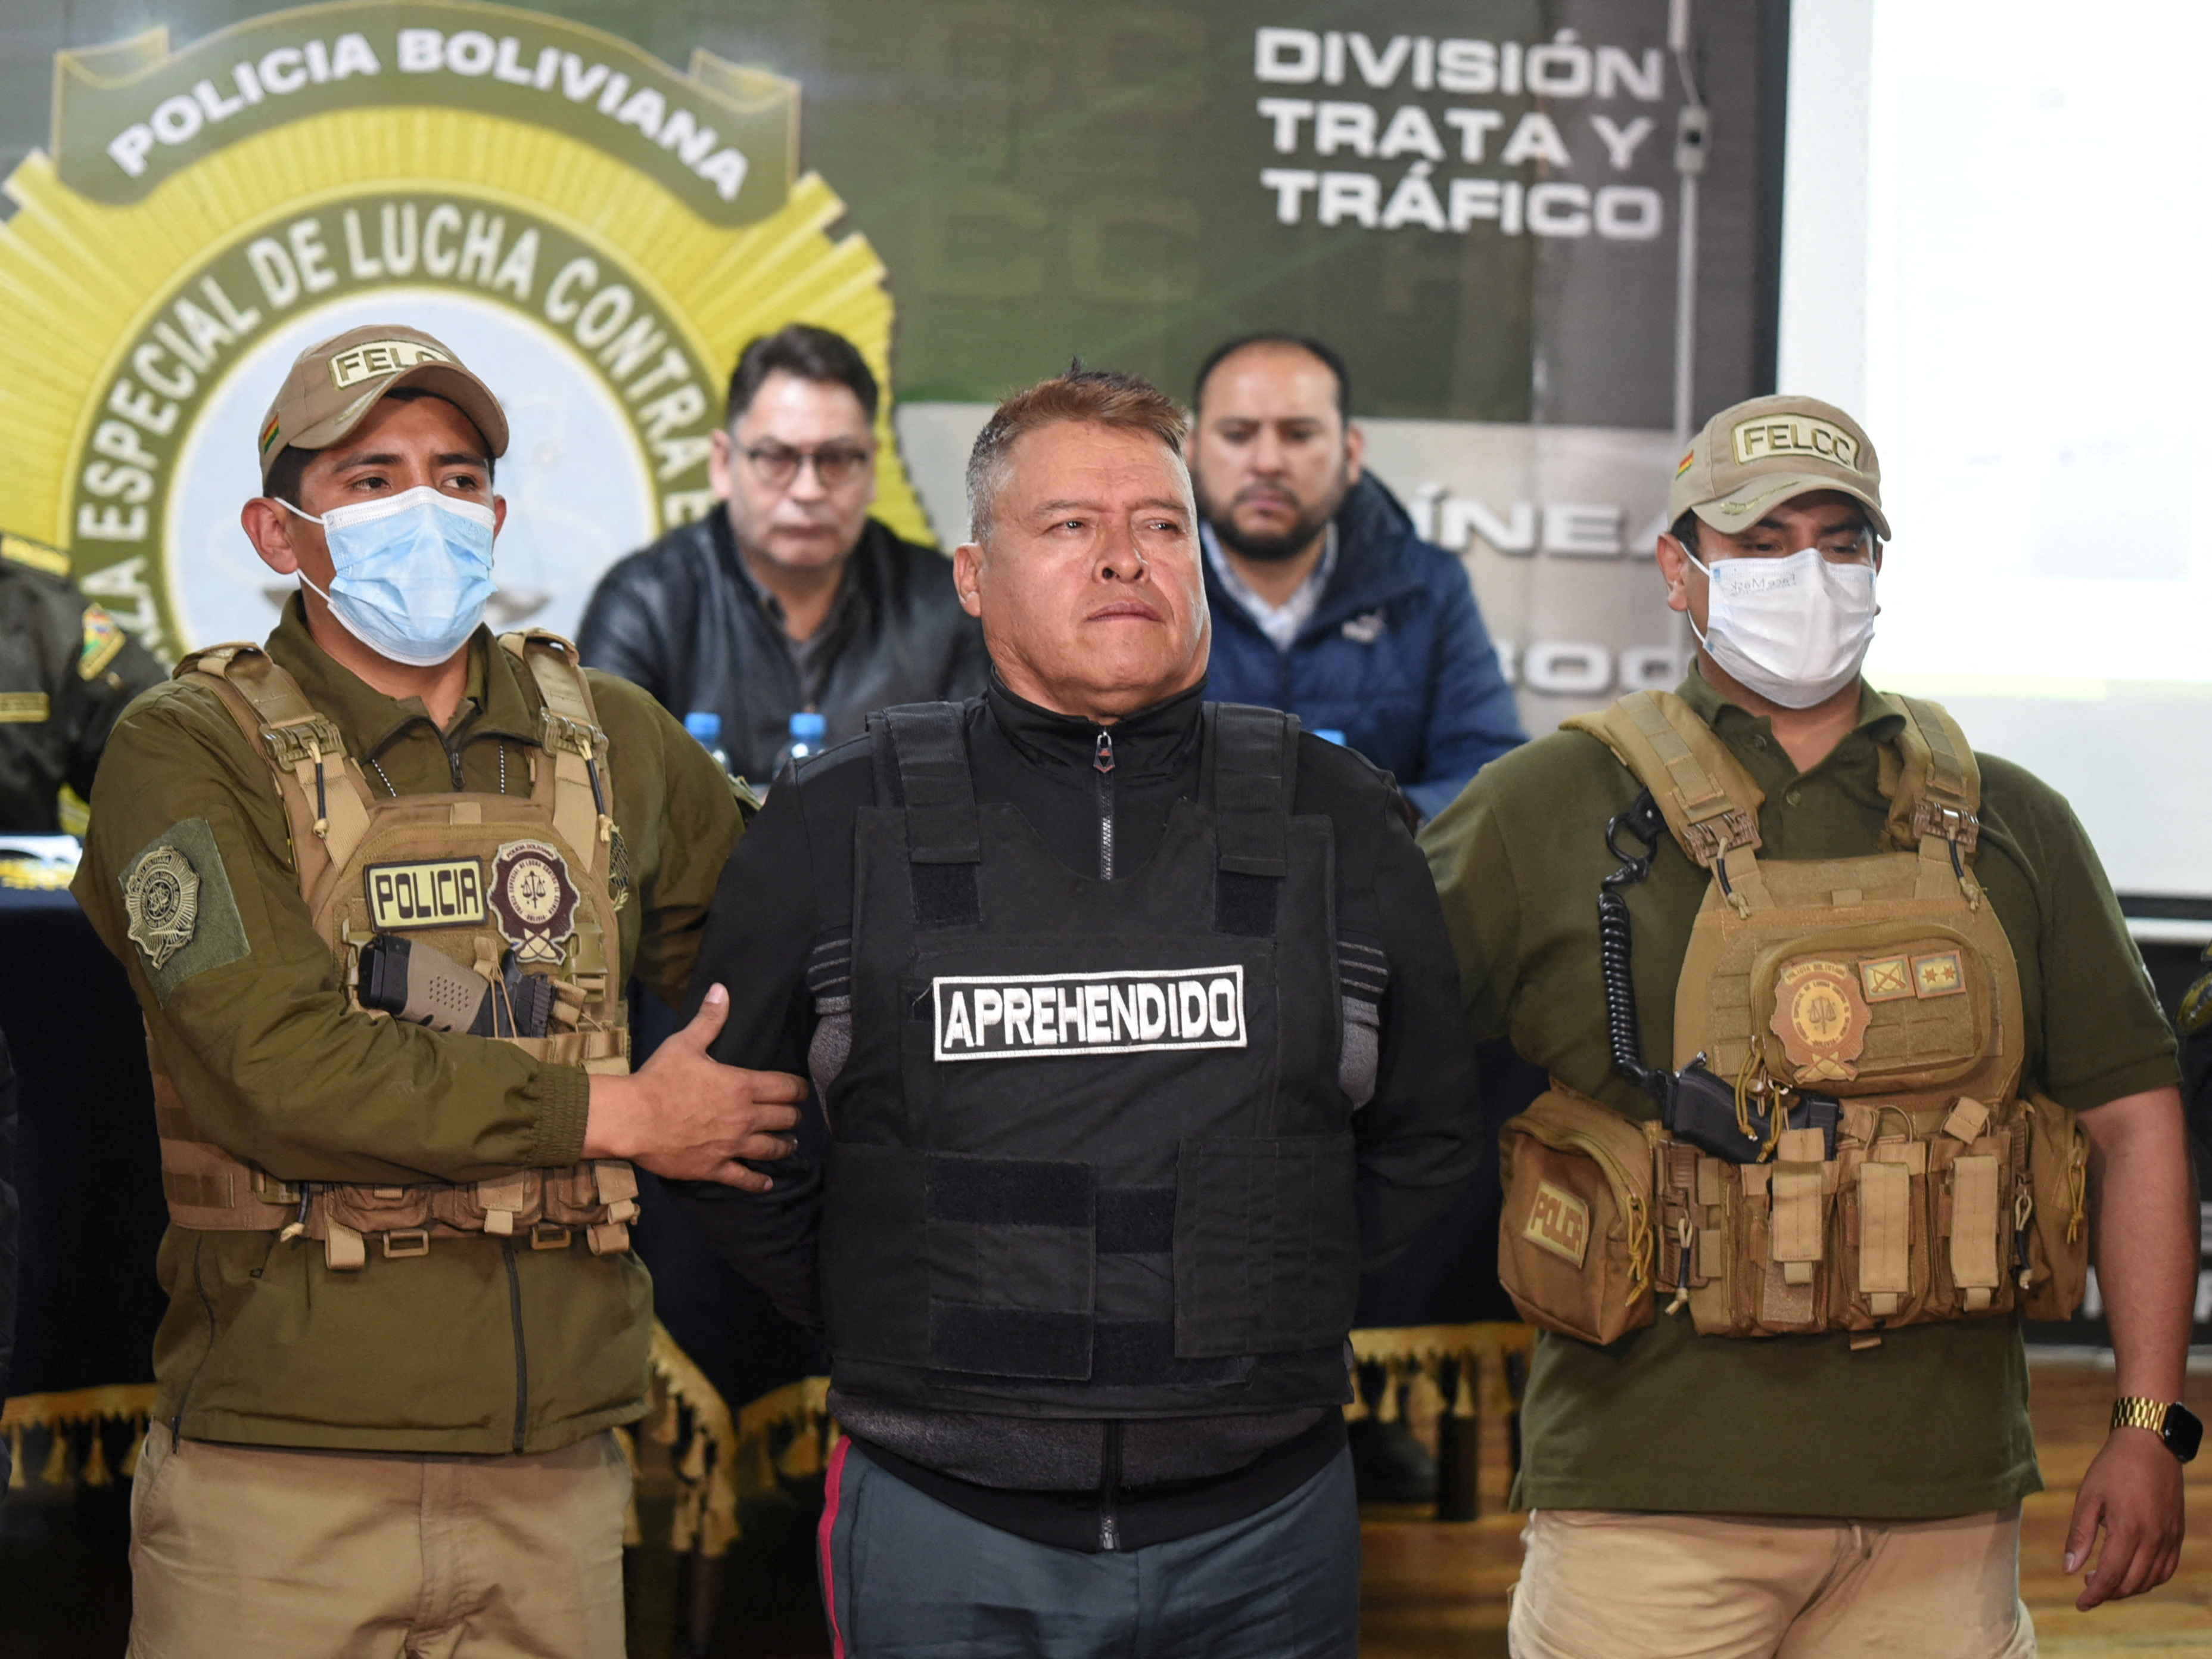 Bolivian General Juan Jose Zuniga is presented following his arrest by the authorities for a coup attempt in La Paz